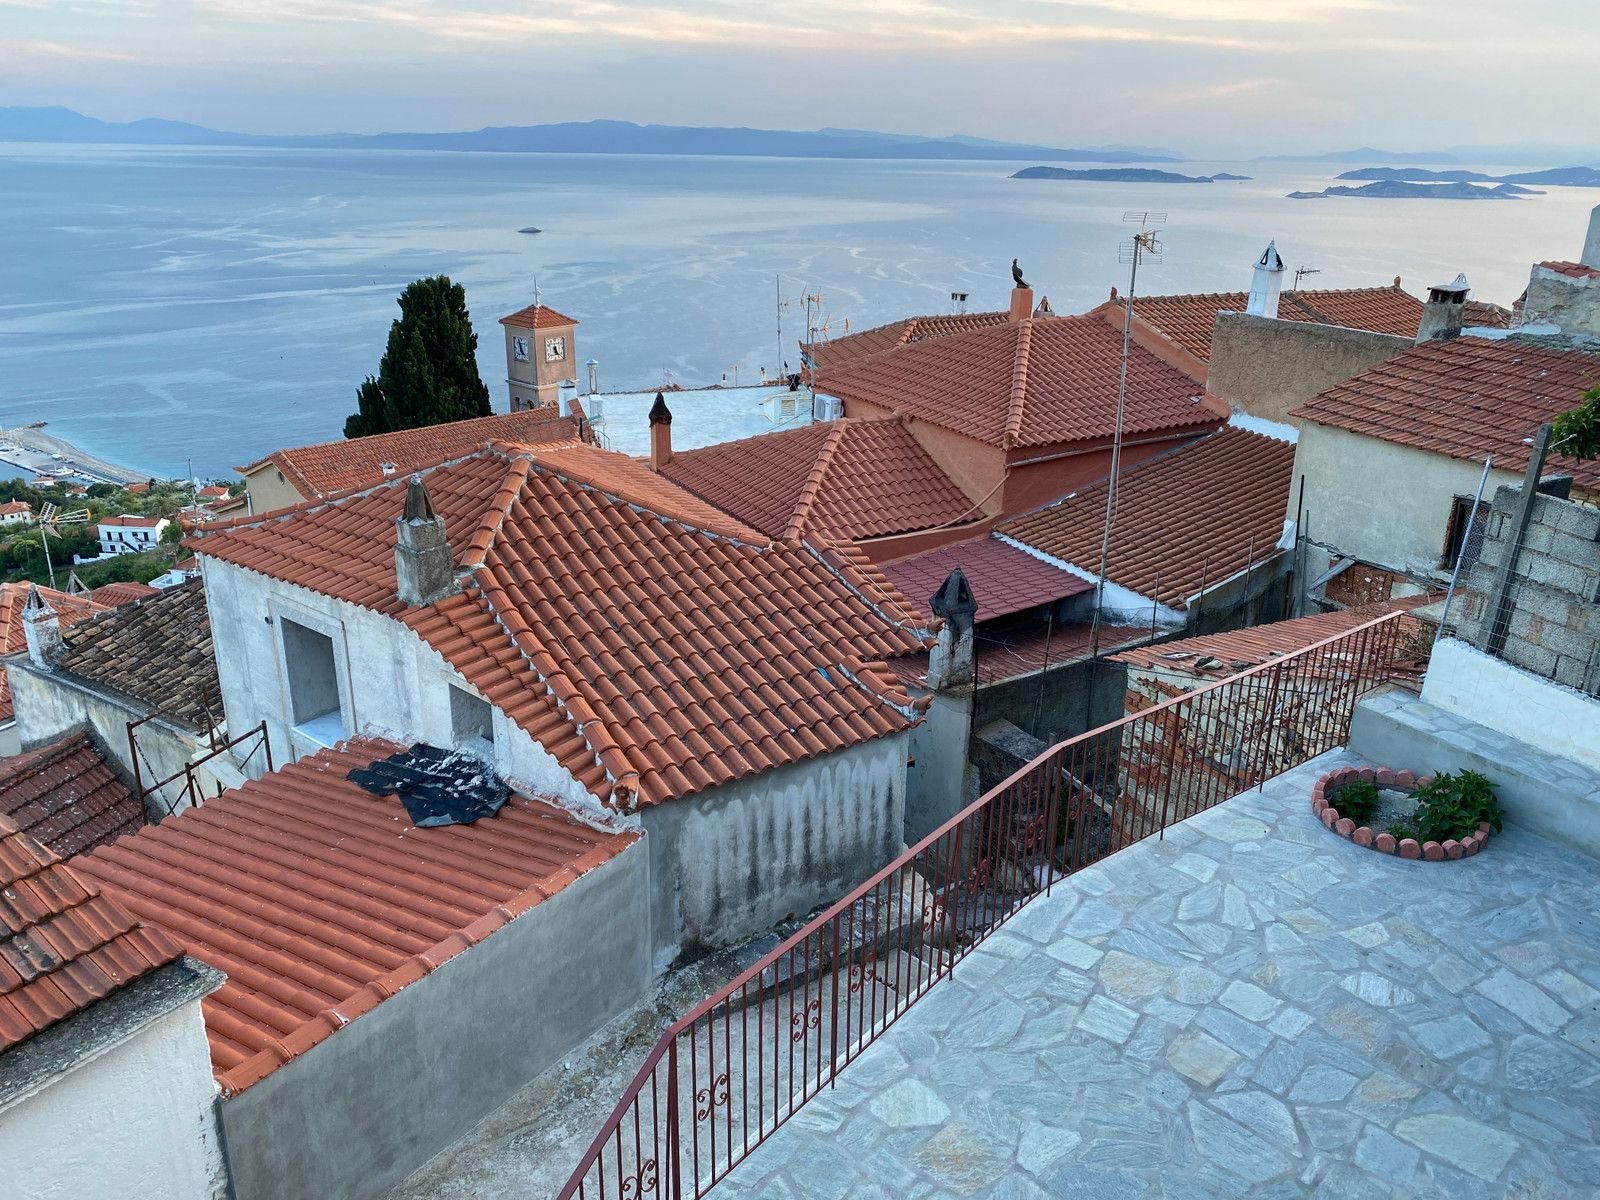 spacious_house_with_amazing_view_in_glossa_roofs.jpeg